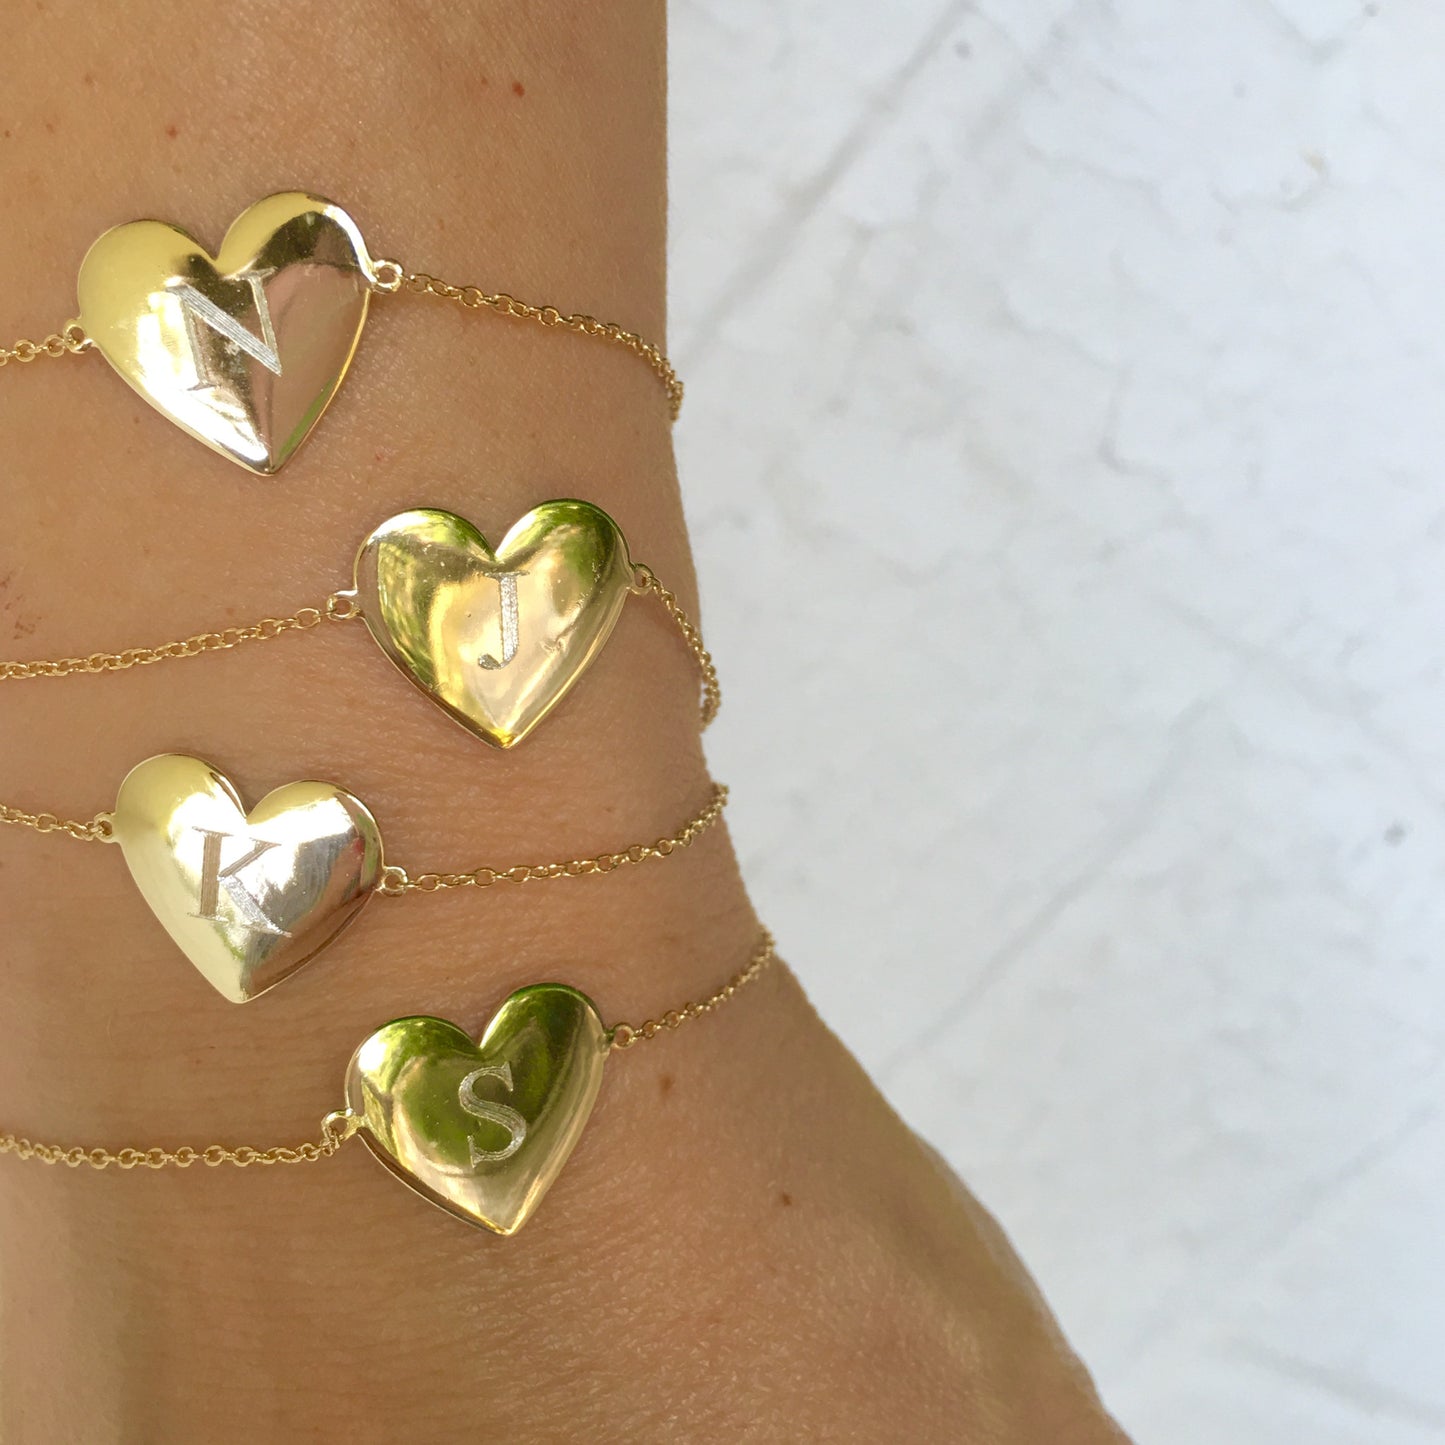 Engraved Initial Heart Bracelet - Retail Therapy Jewelry